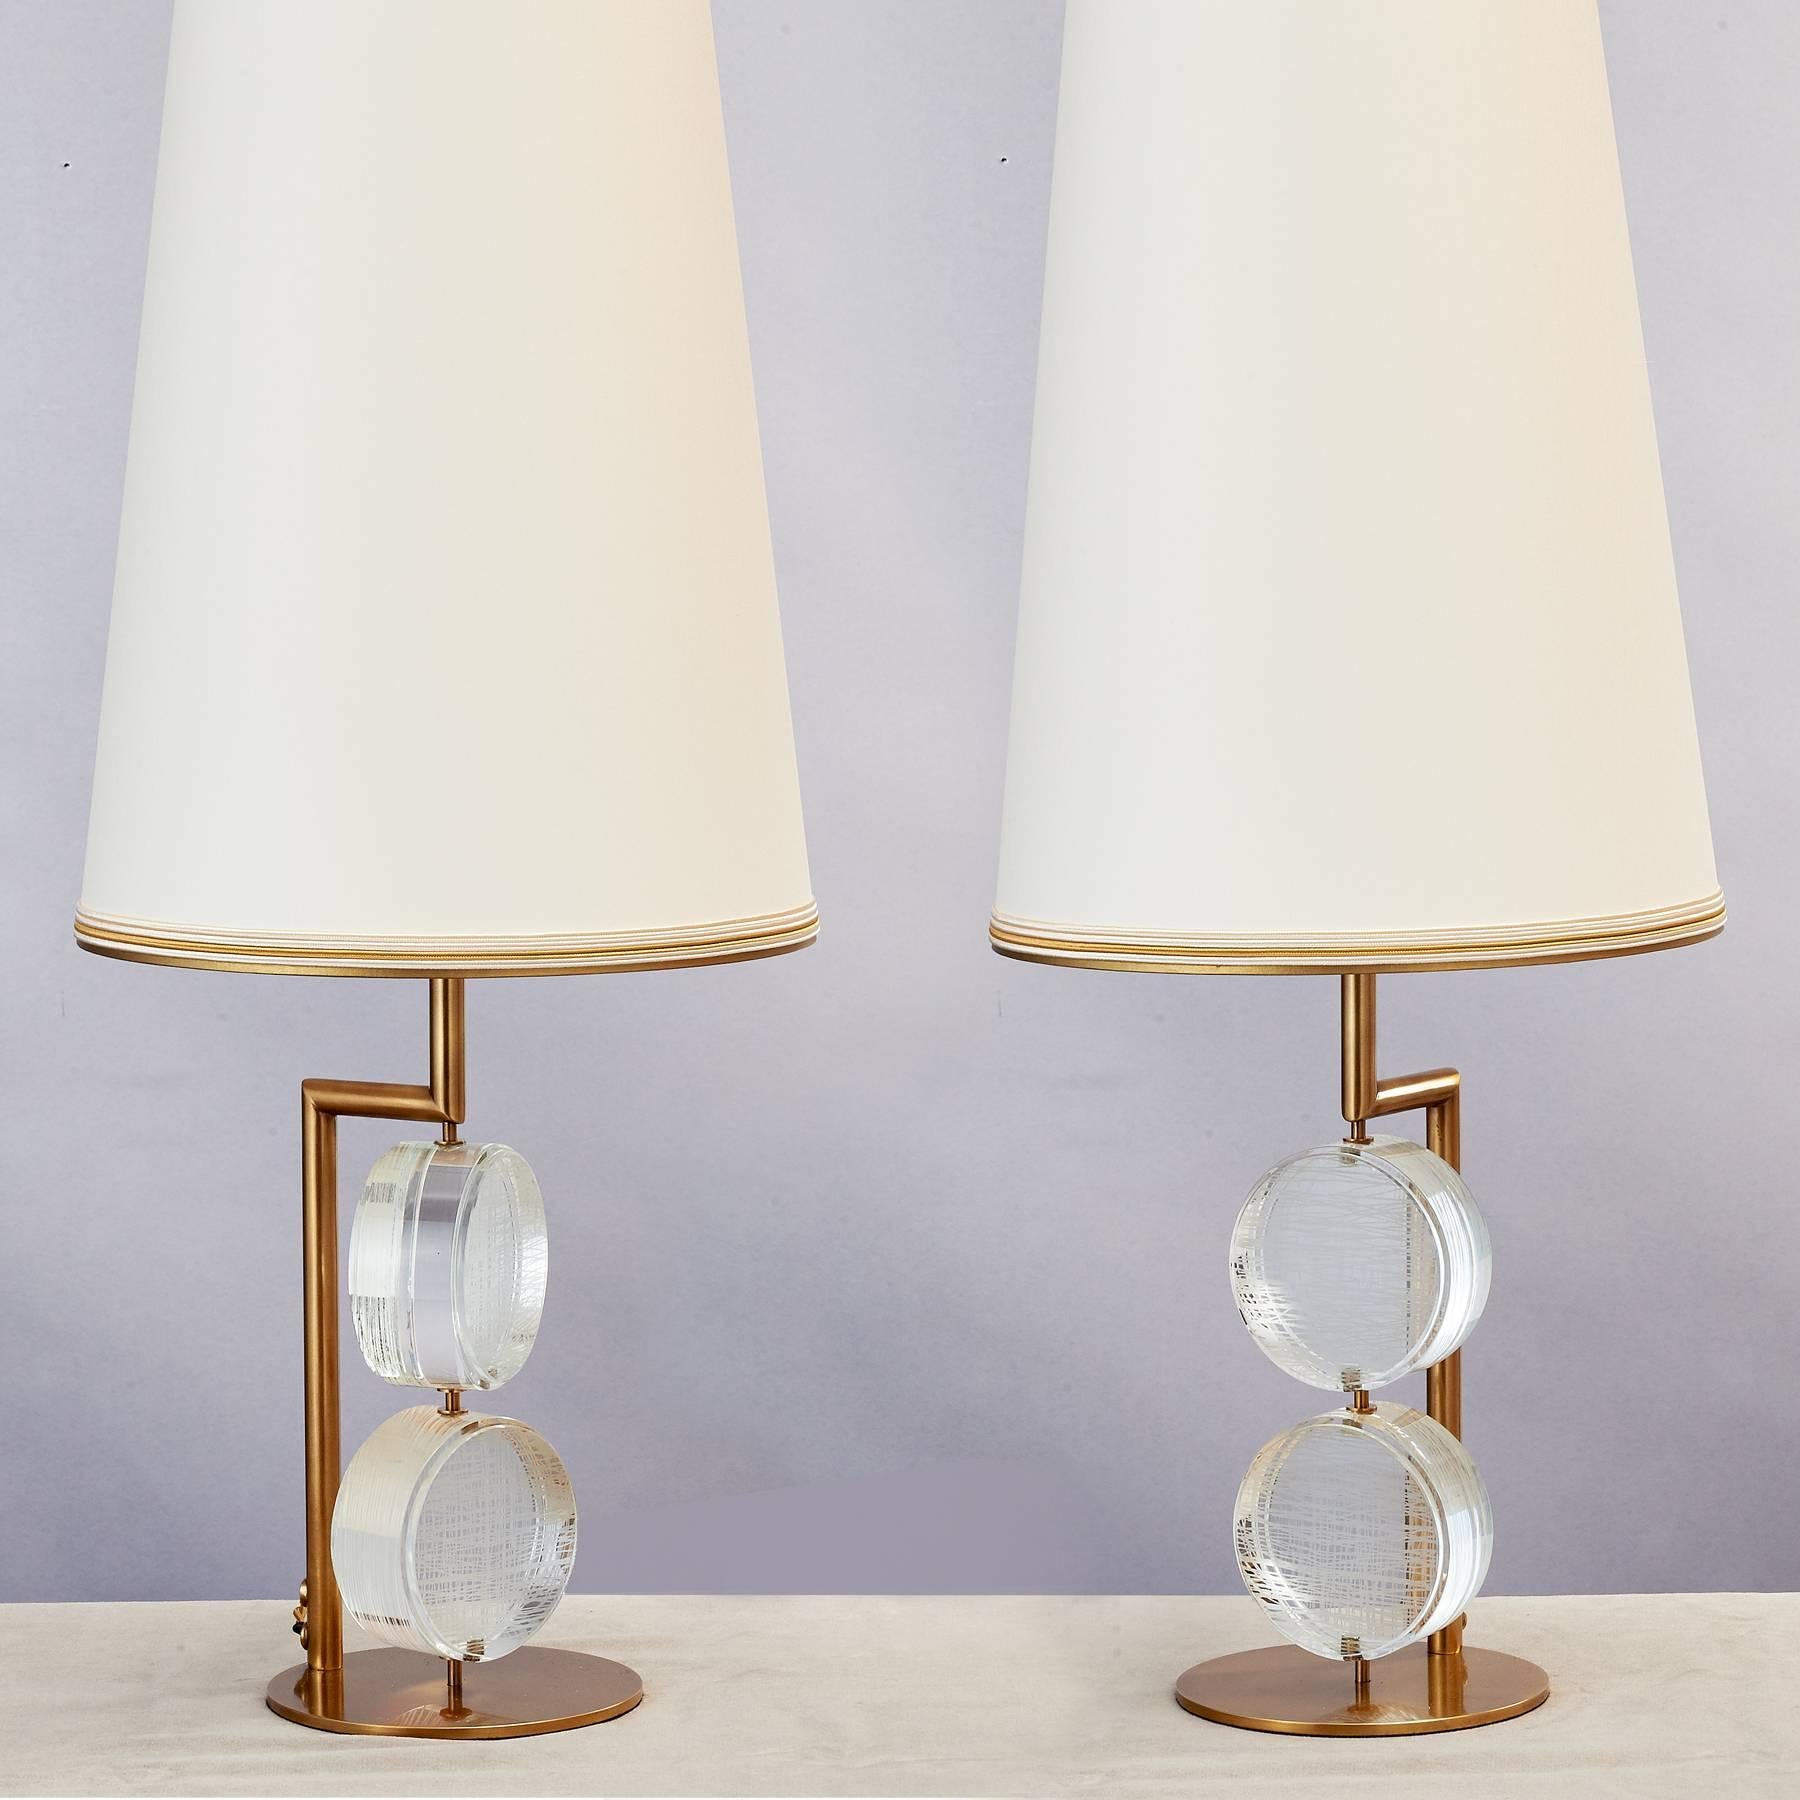 Bronze Limited Edition Pair of Etched Glass Lamps by Roberto Rida